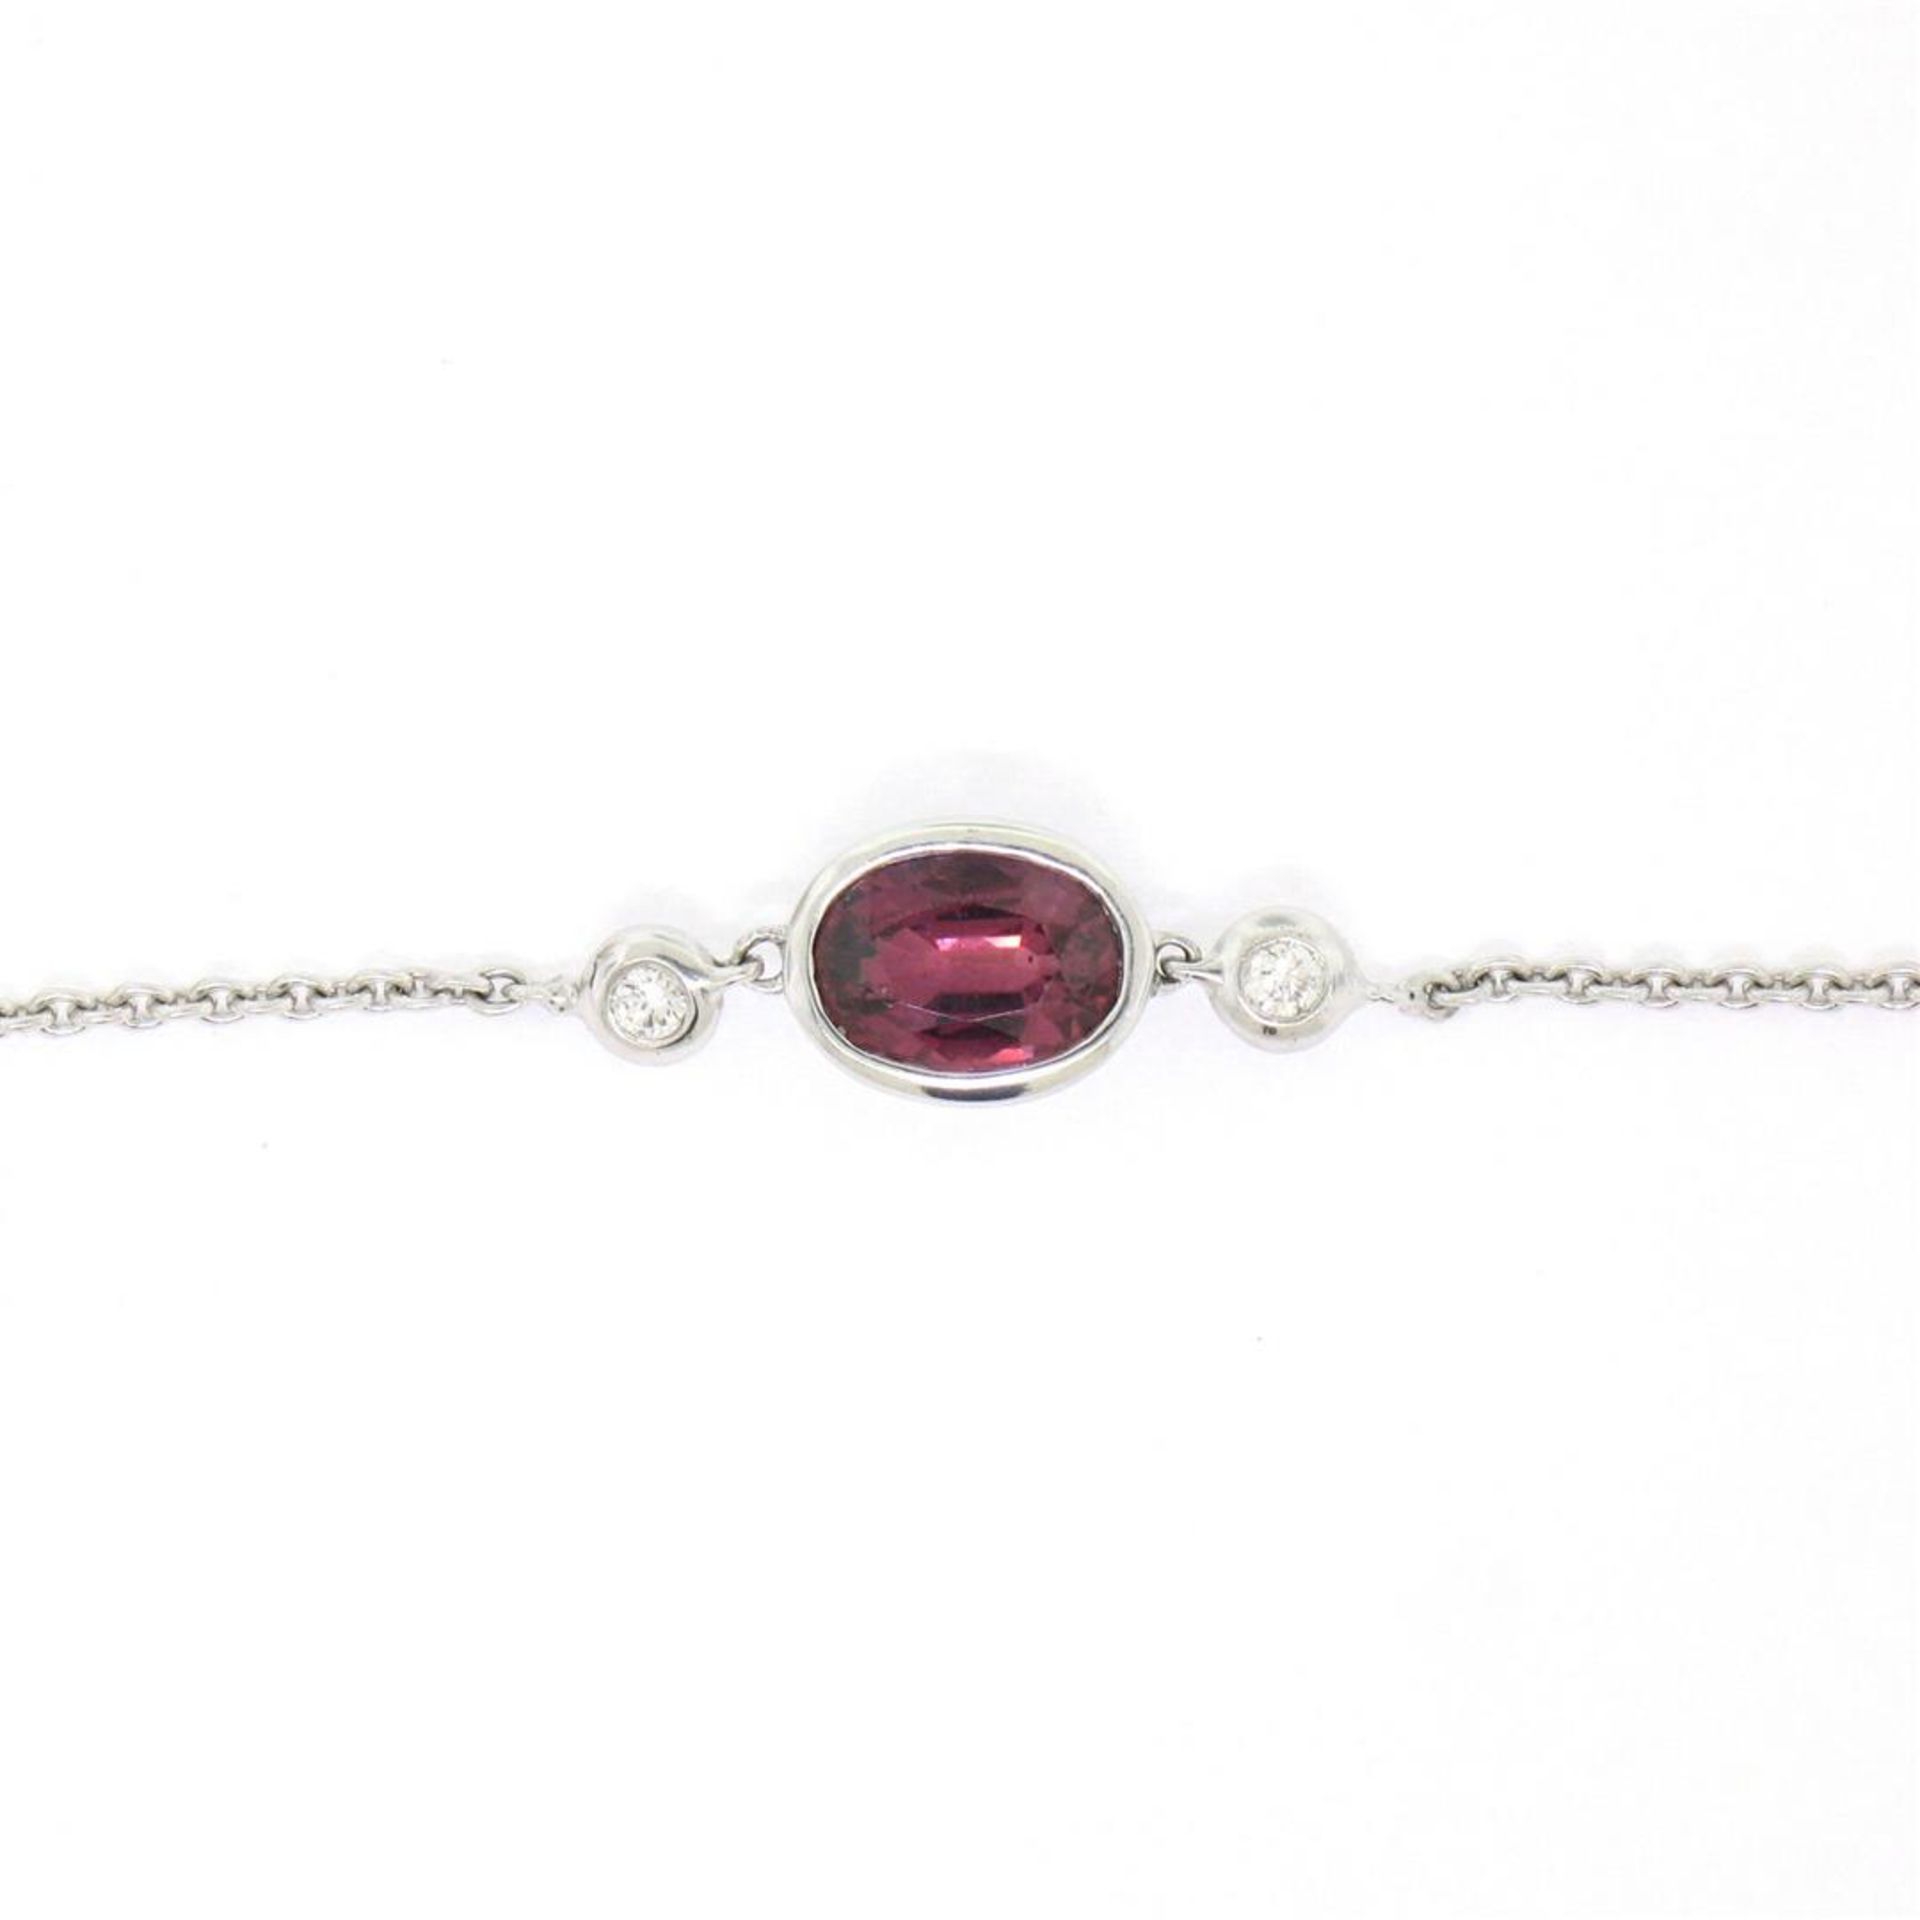 New 18kt White Gold 1.13 ctw GIA Pink Sapphire and Diamond Pendant Necklace - Image 5 of 9